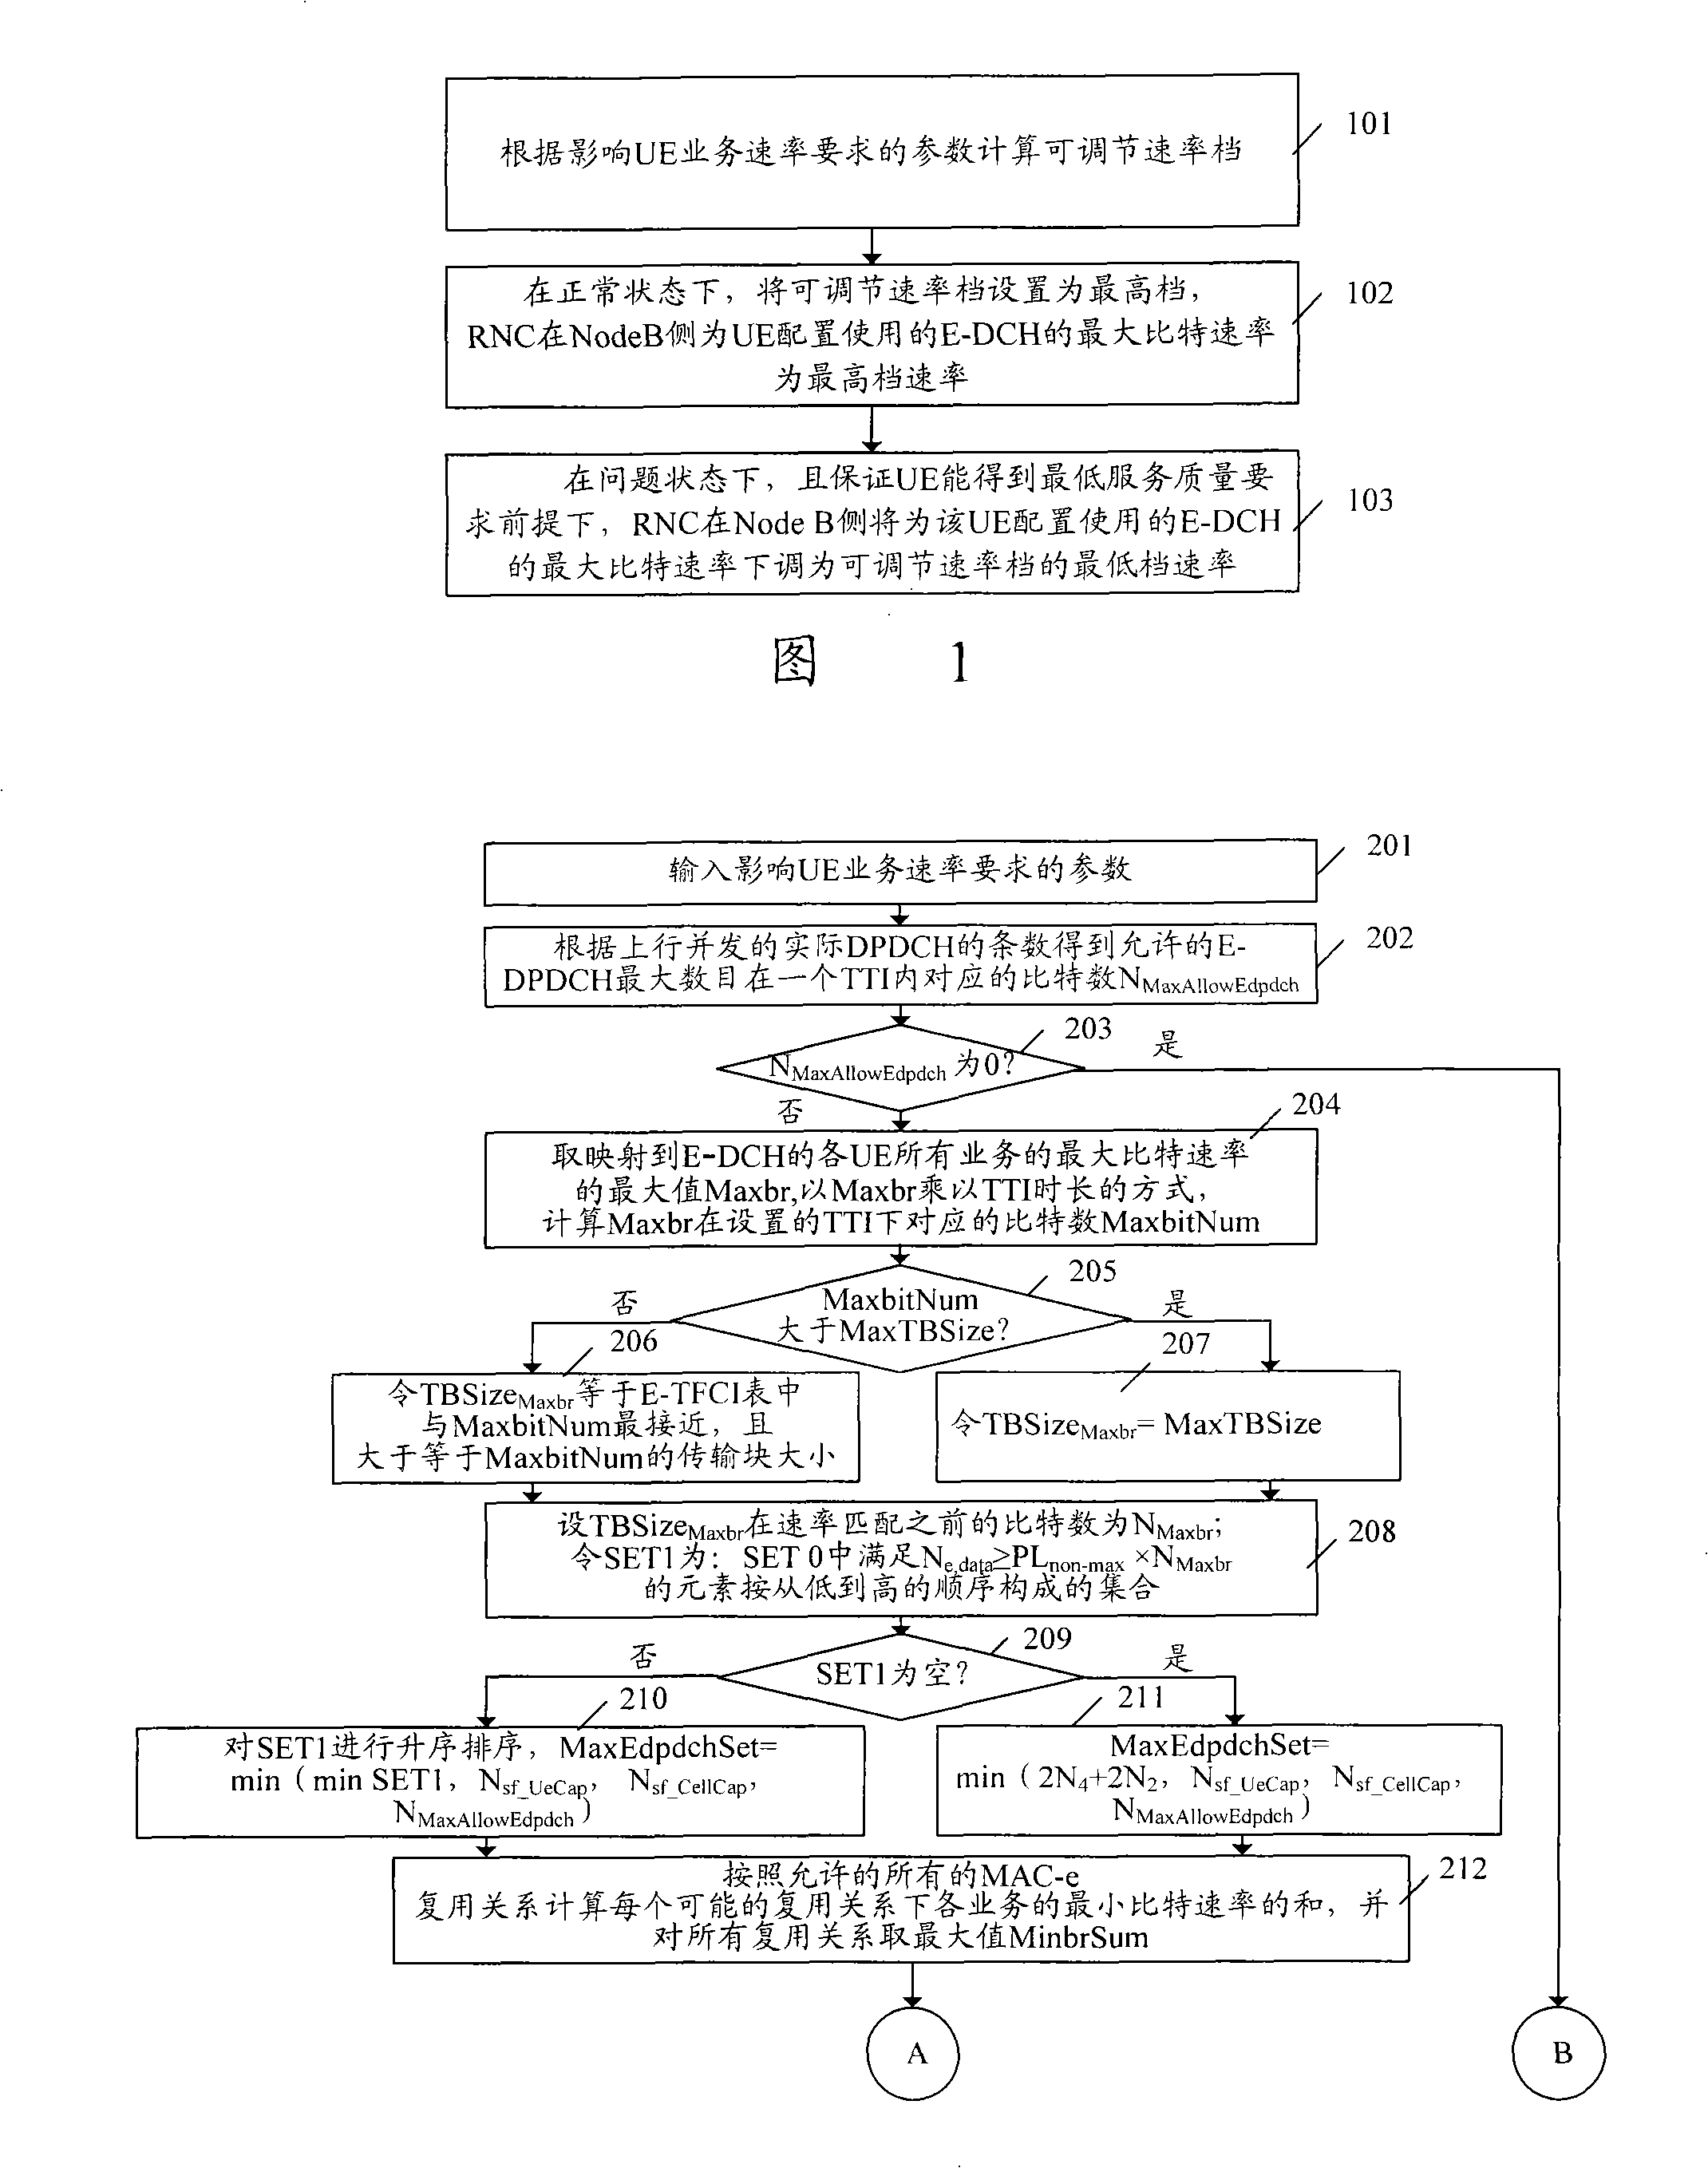 Solving method for non-service cell problem handling and state transition